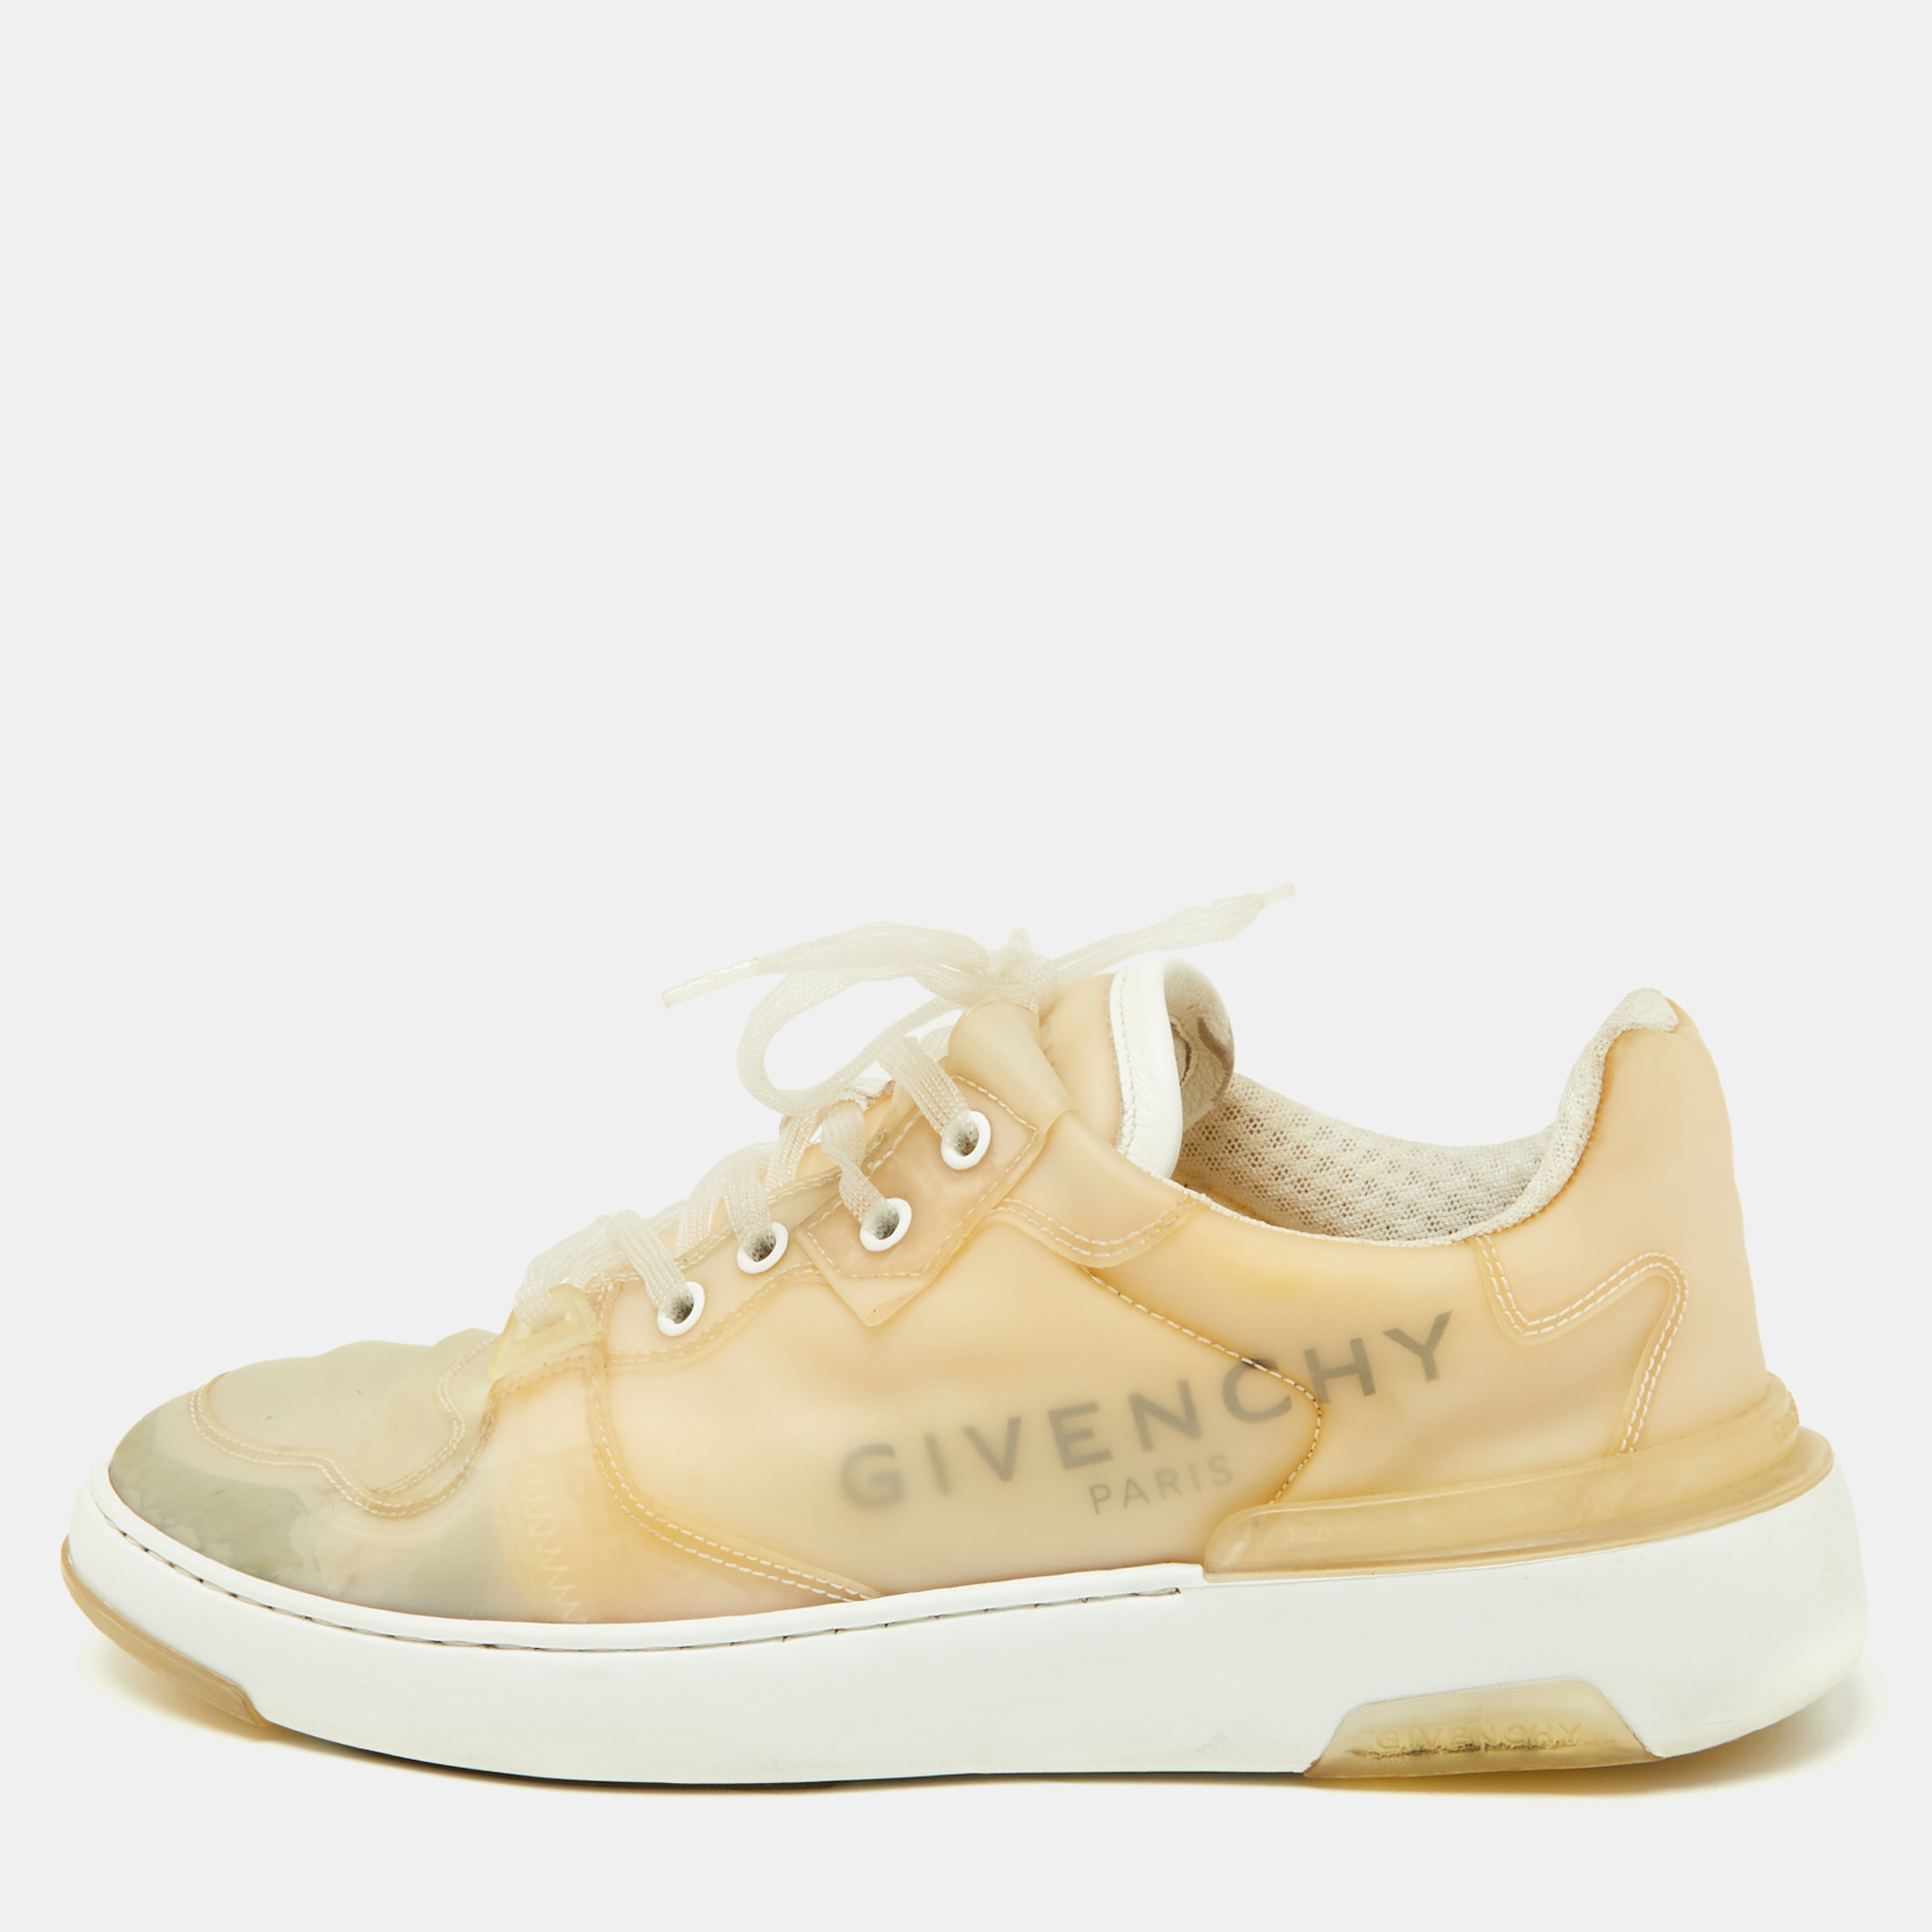 

Givenchy Beige PVC Low Top Sneakers Size